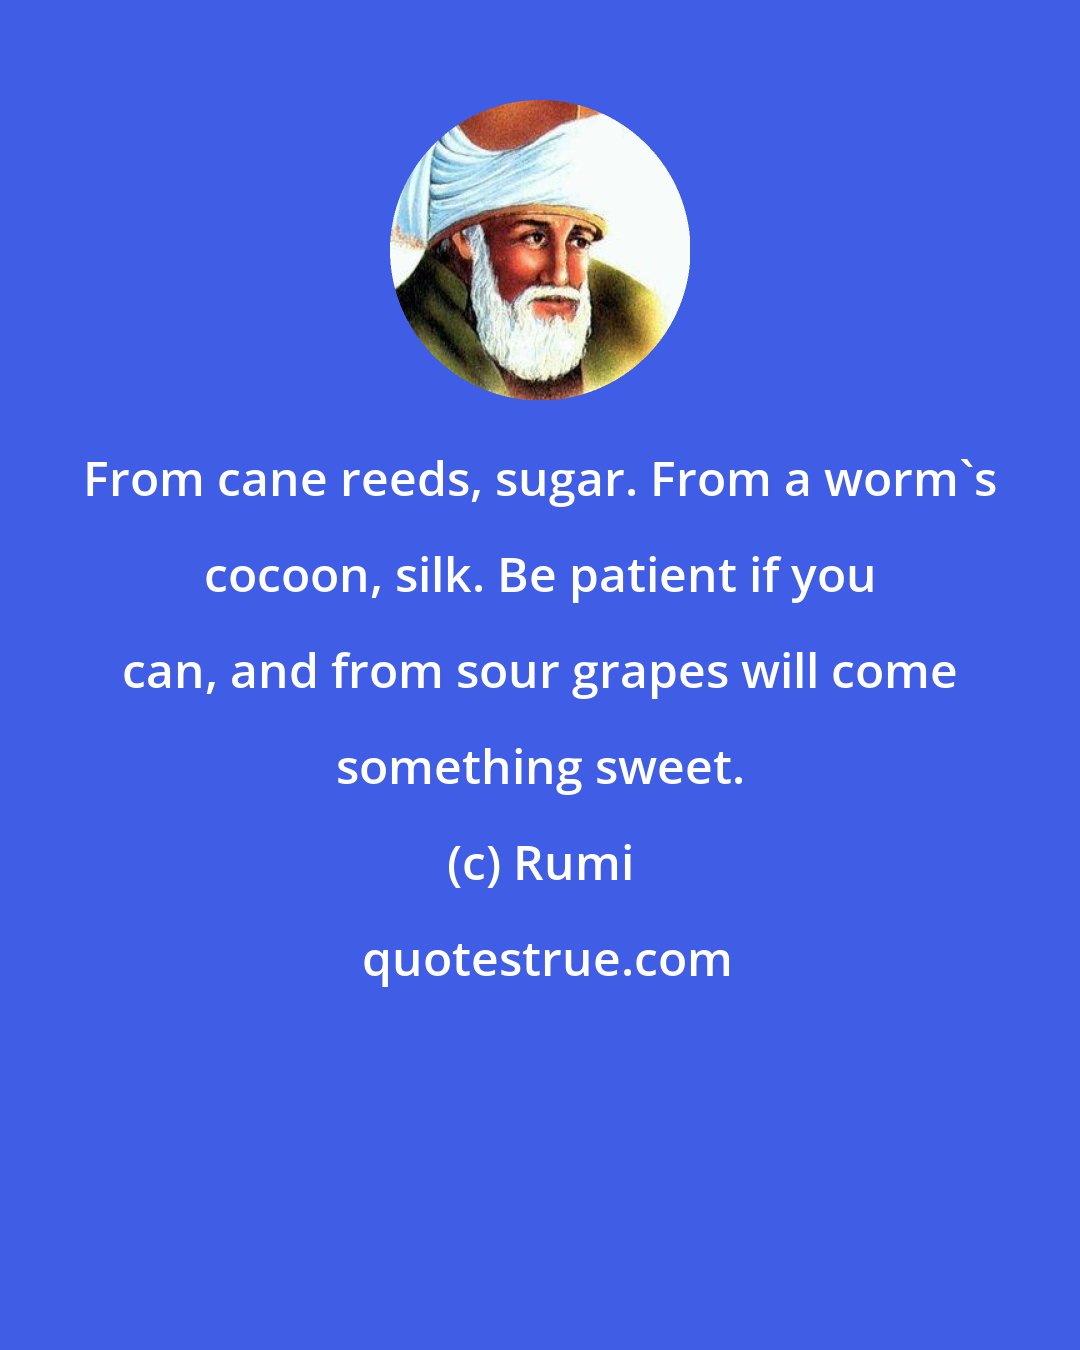 Rumi: From cane reeds, sugar. From a worm's cocoon, silk. Be patient if you can, and from sour grapes will come something sweet.